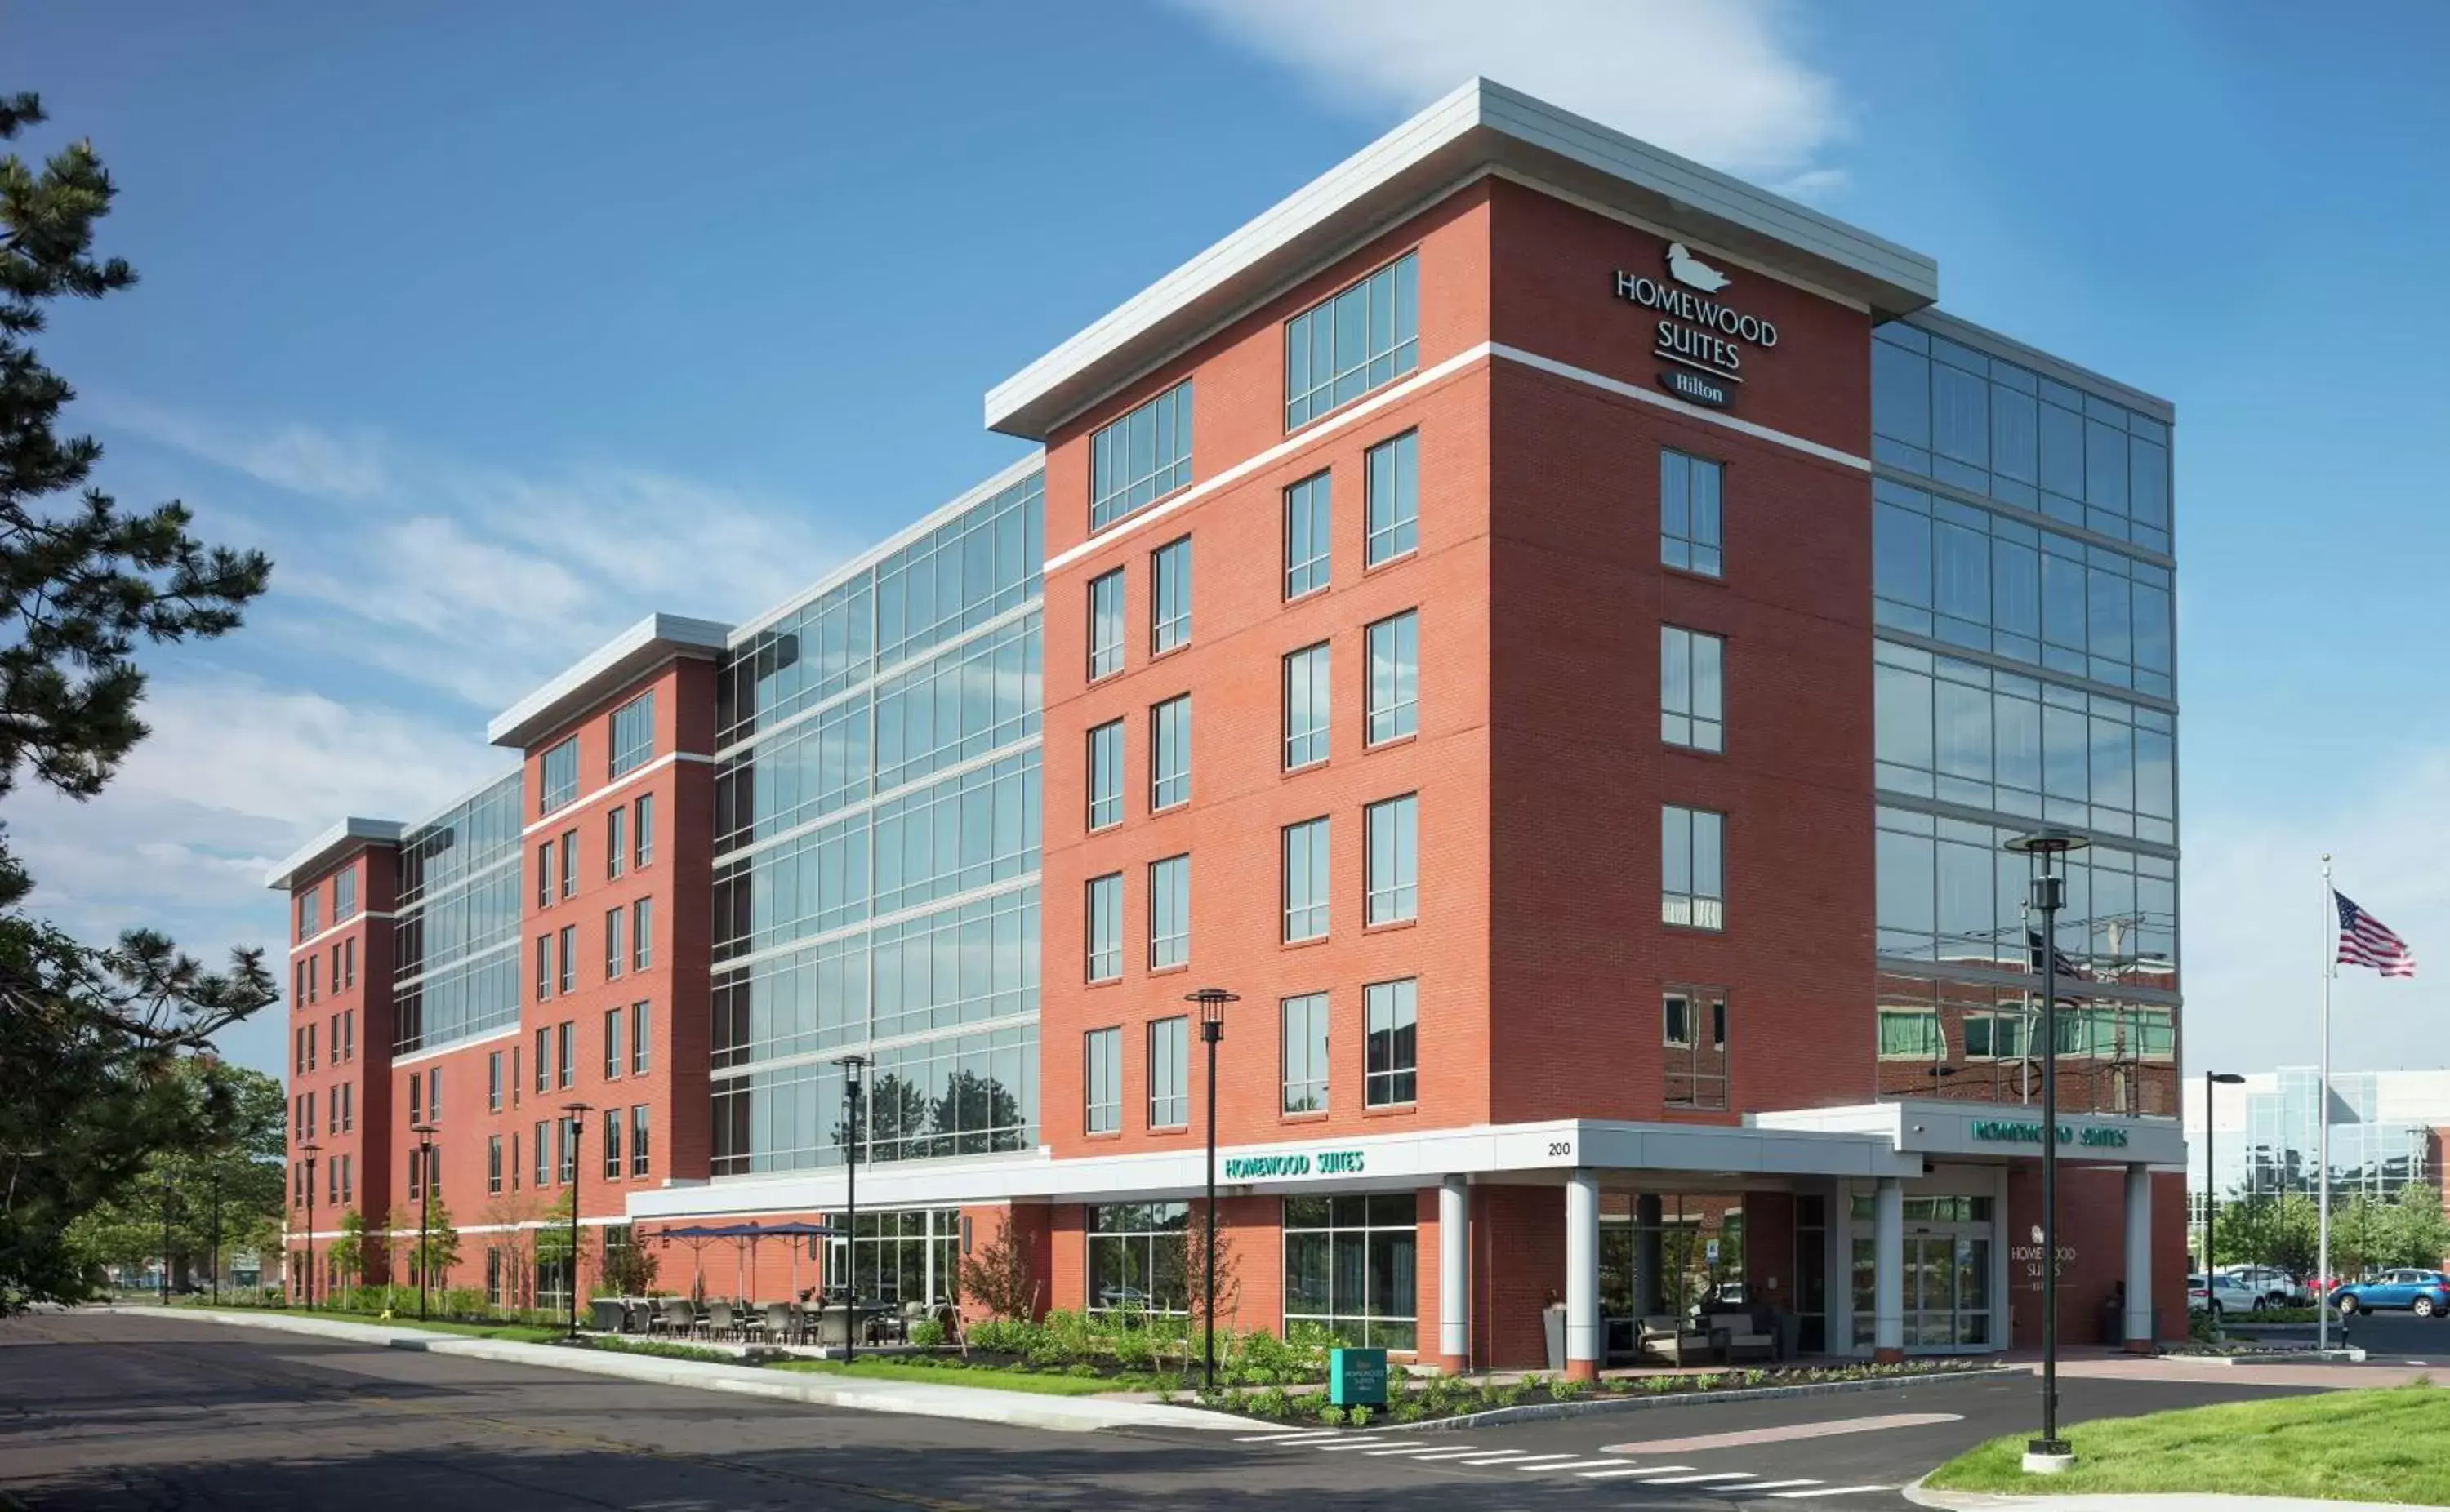 Property Building in Homewood Suites by Hilton Needham Boston